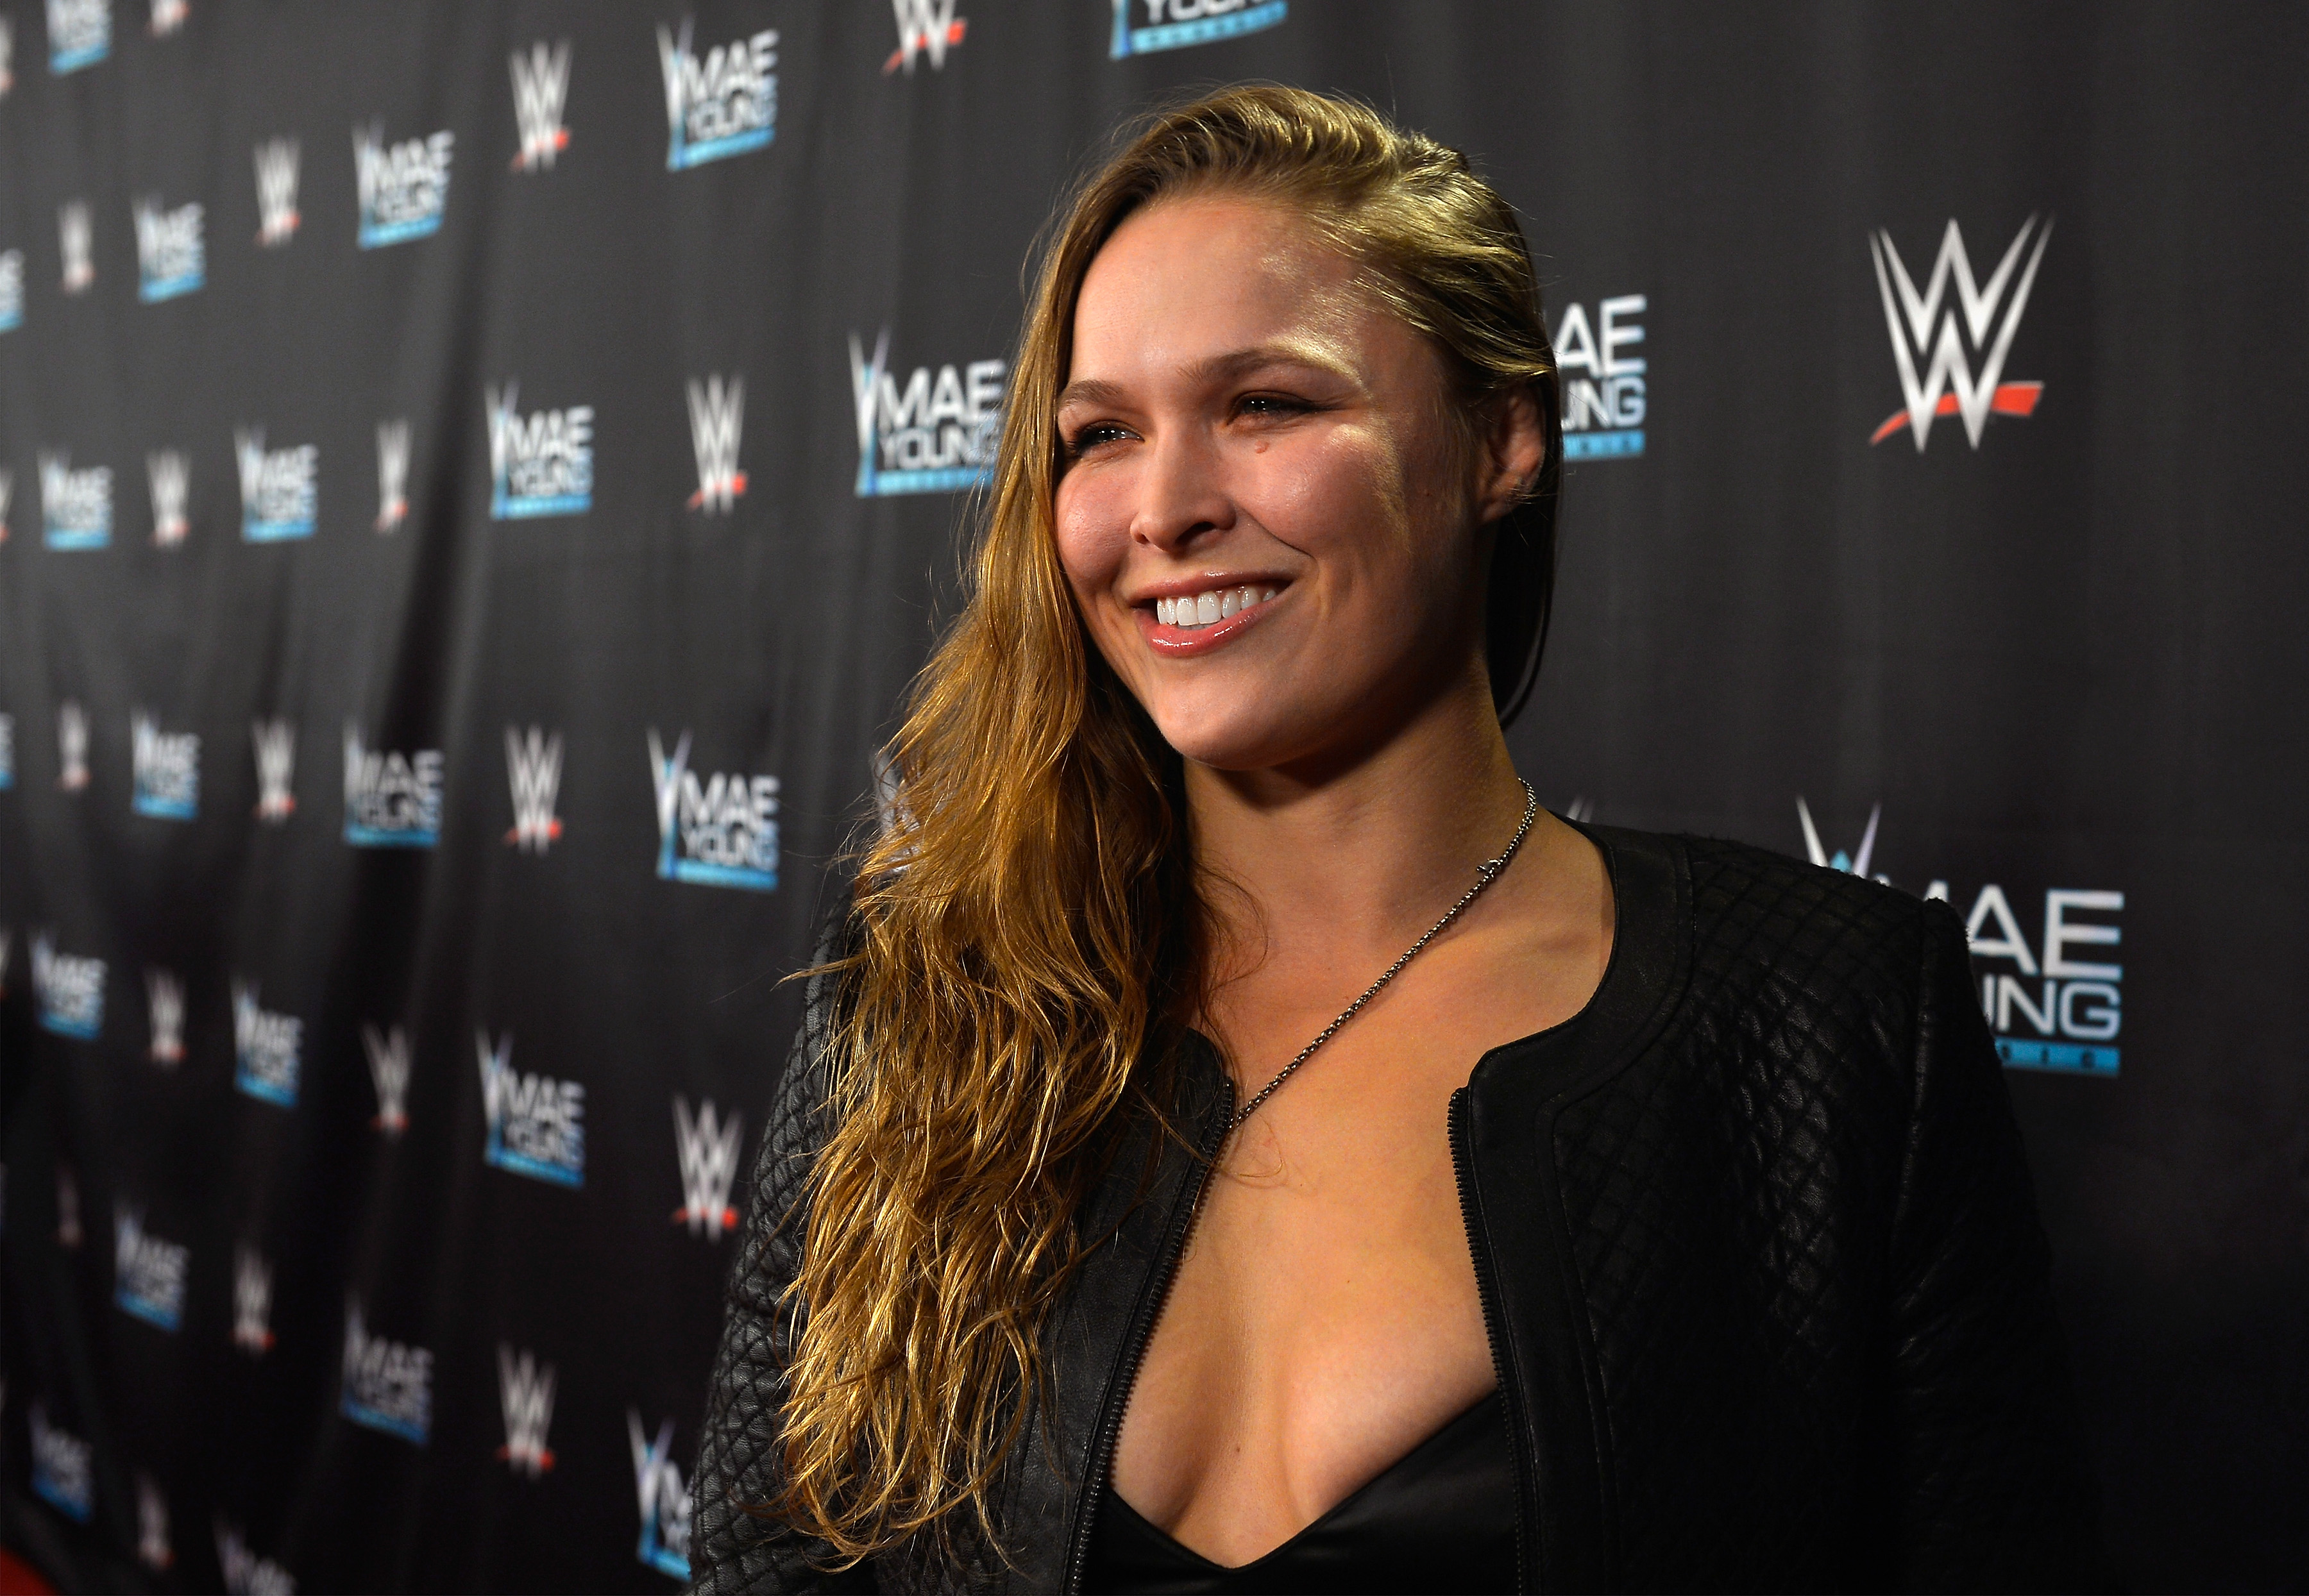 Ronda Rousey Xnxxx Video - WWE suspends Ronda Rousey for 'attacking' referee at SummerSlam - National  | Globalnews.ca